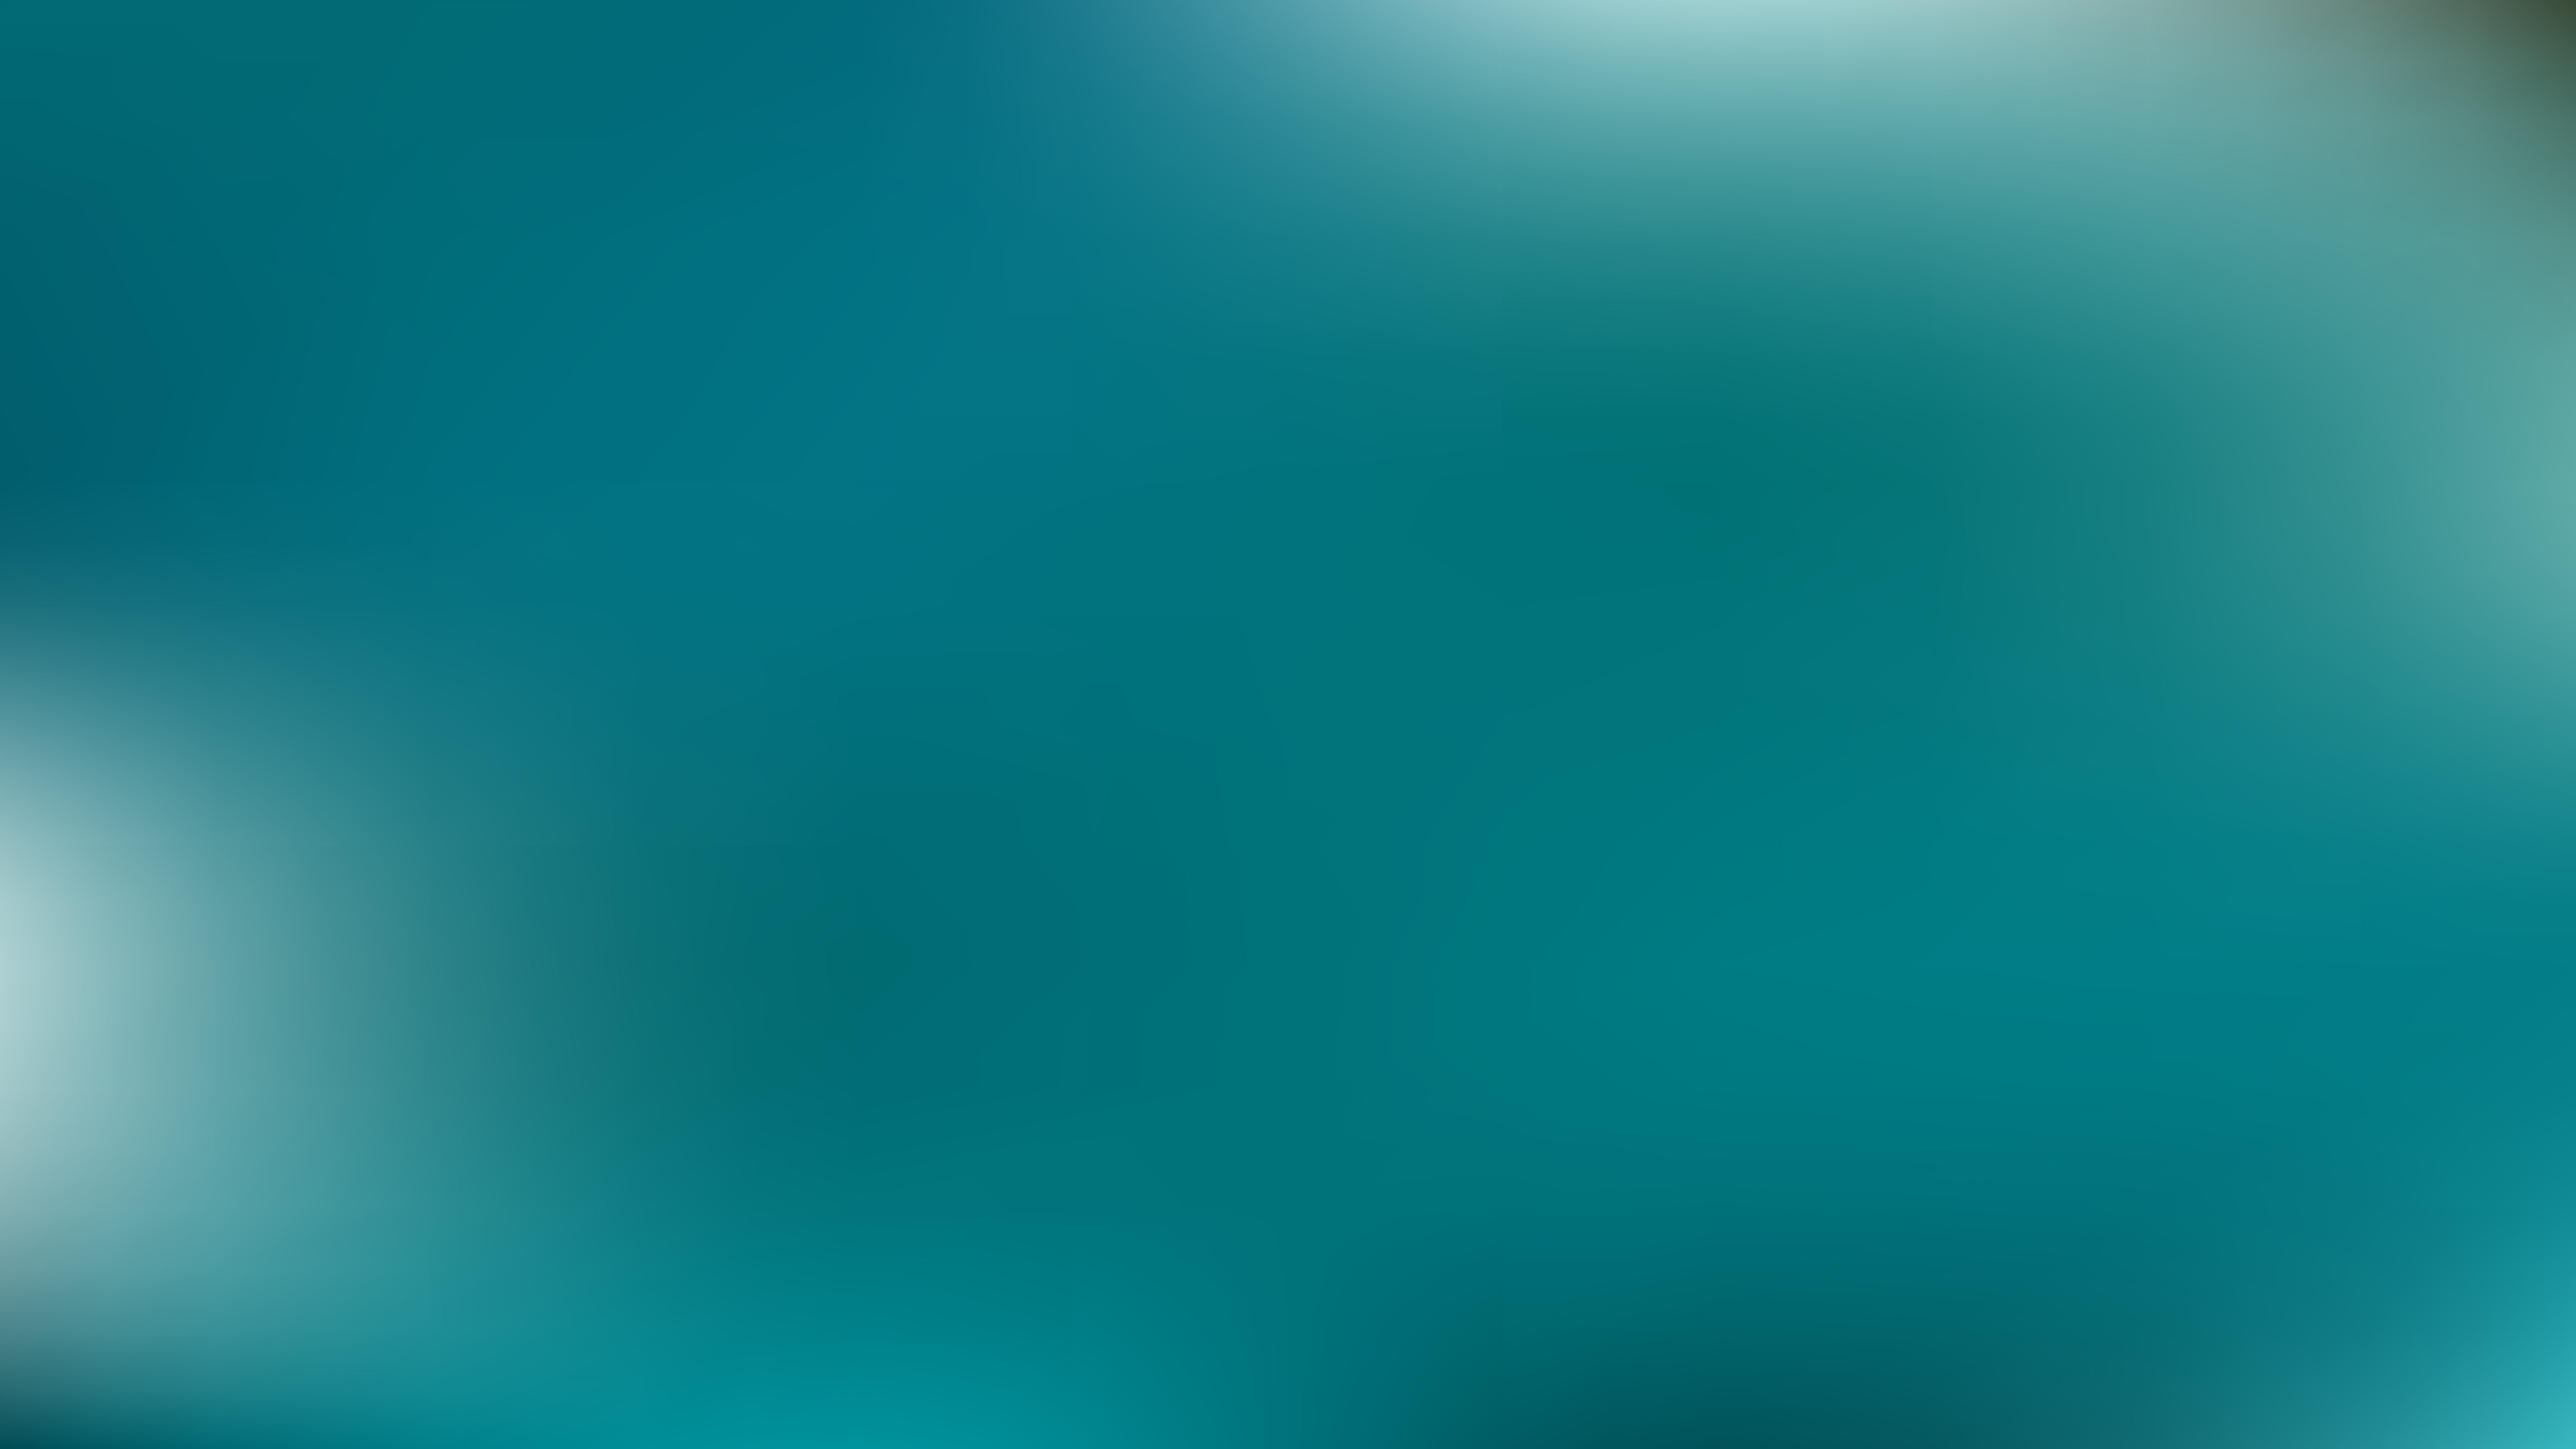 Free Turquoise Corporate PPT Background Design